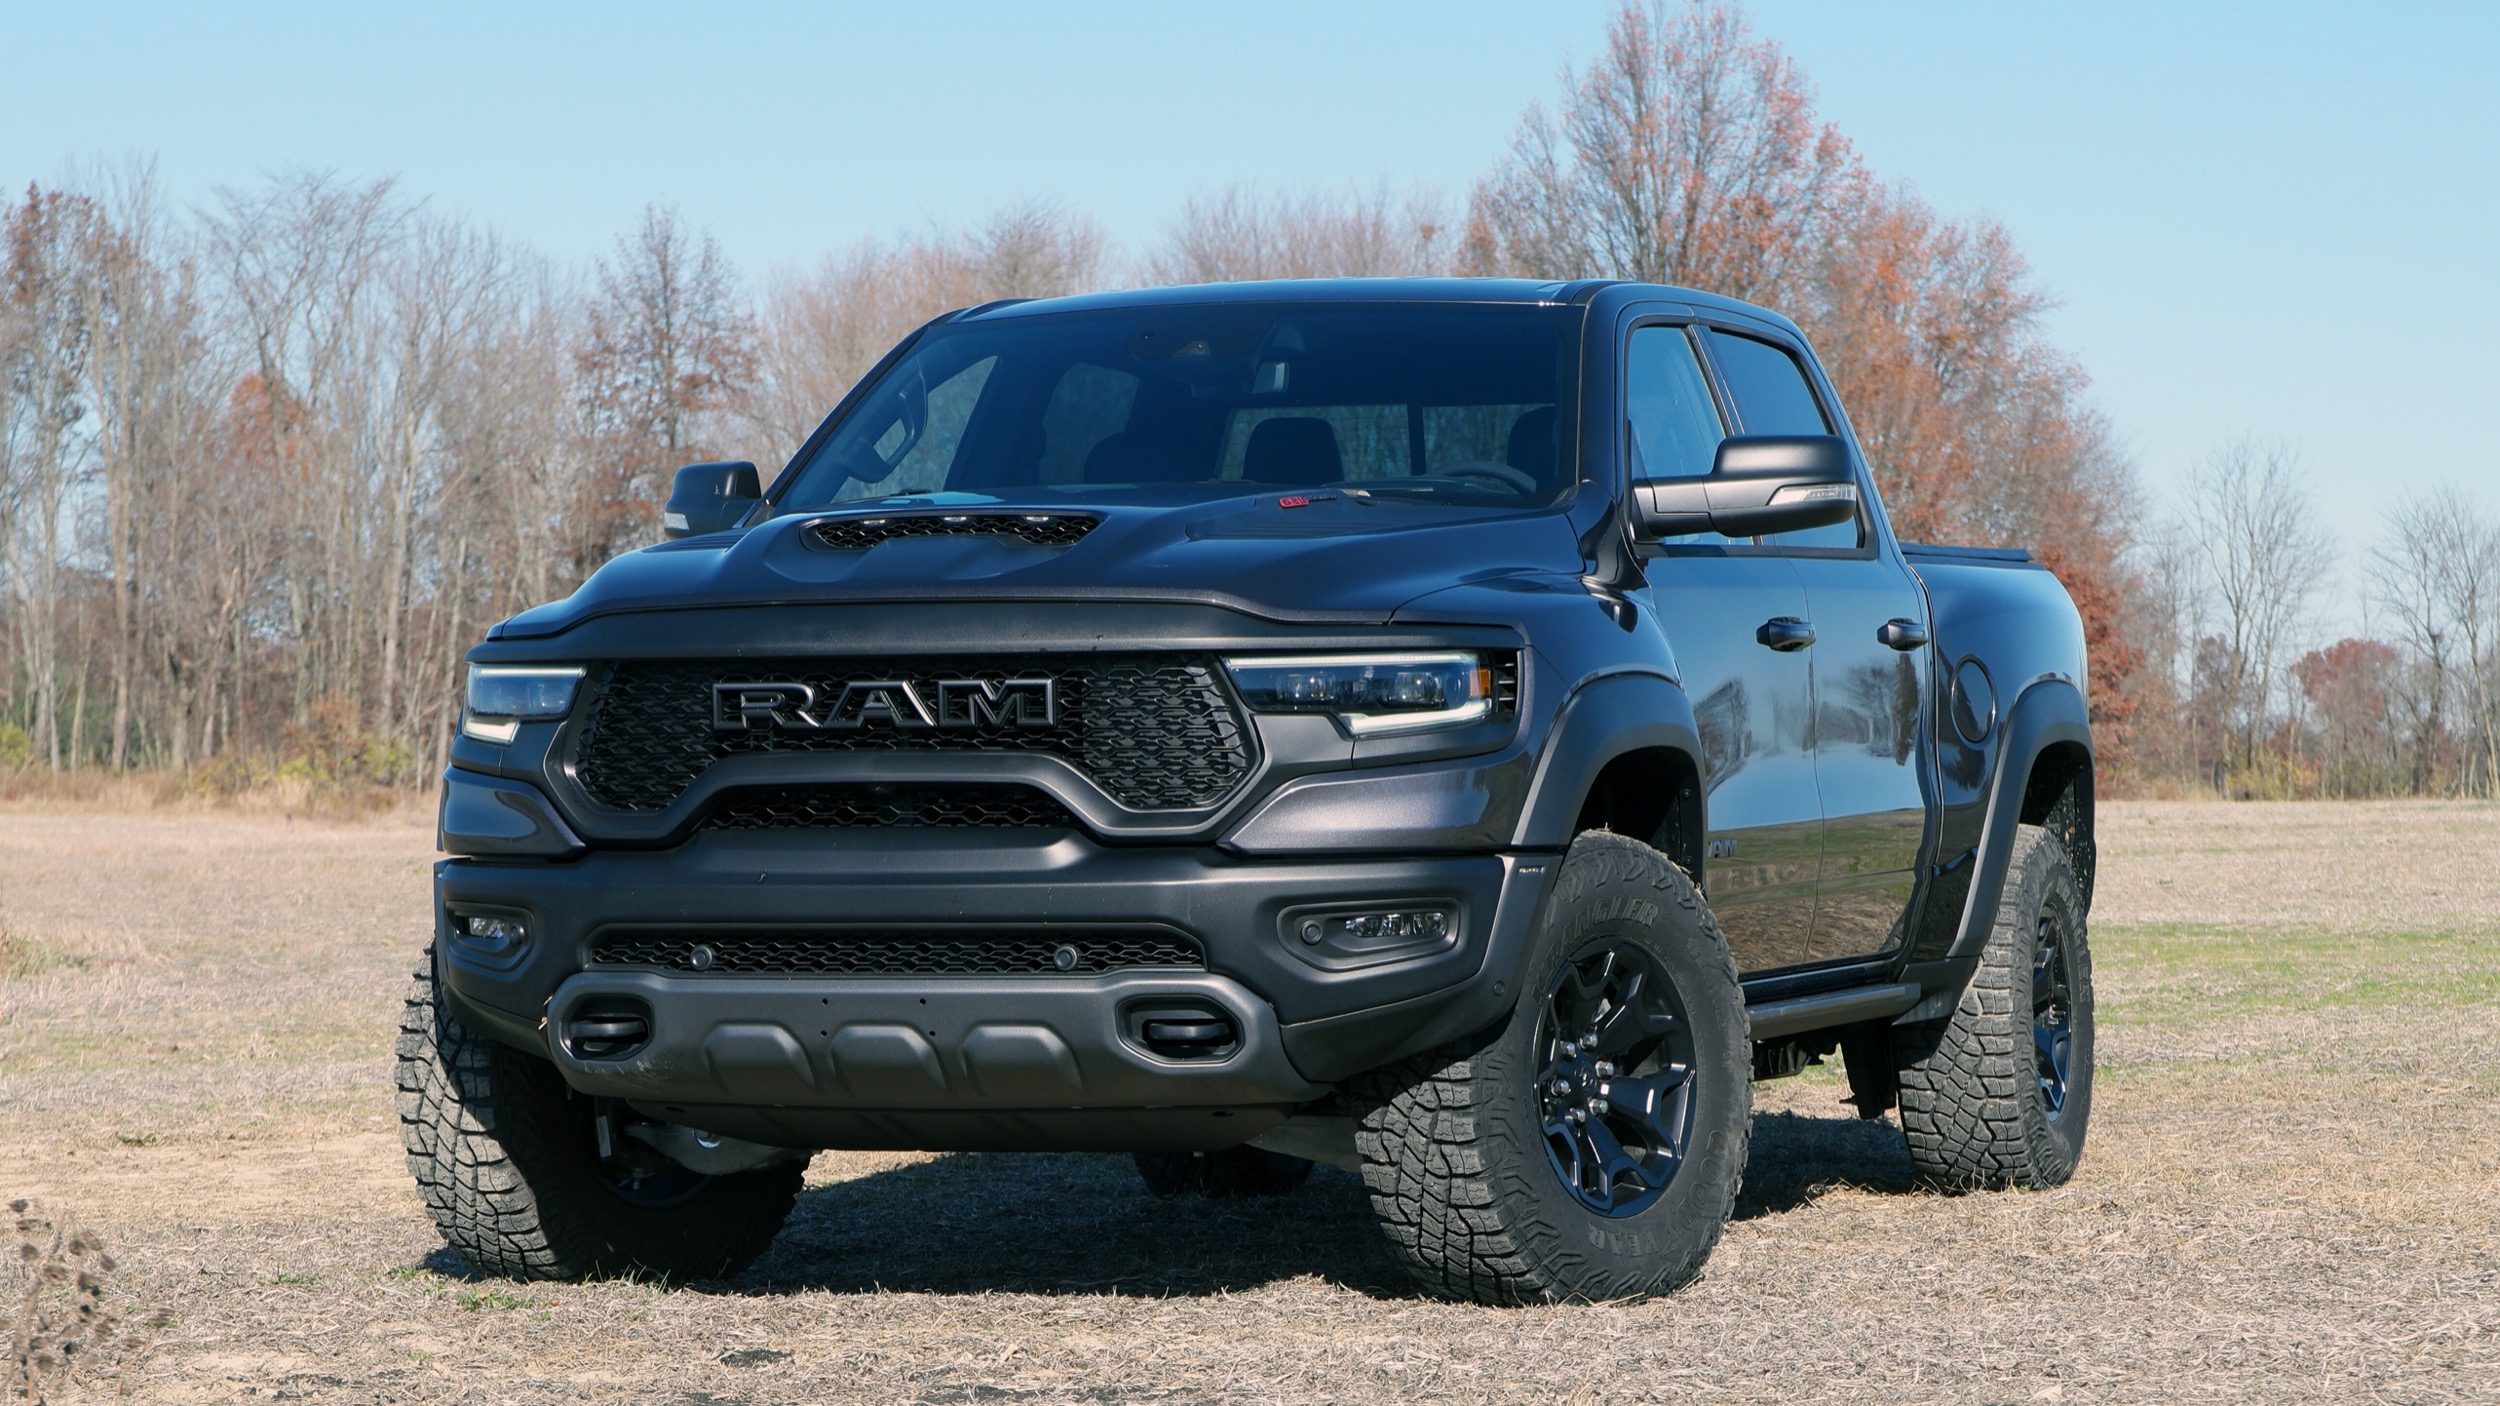 2021 Ram 1500 Review Whats New Specs Prices And Pictures Autoblog